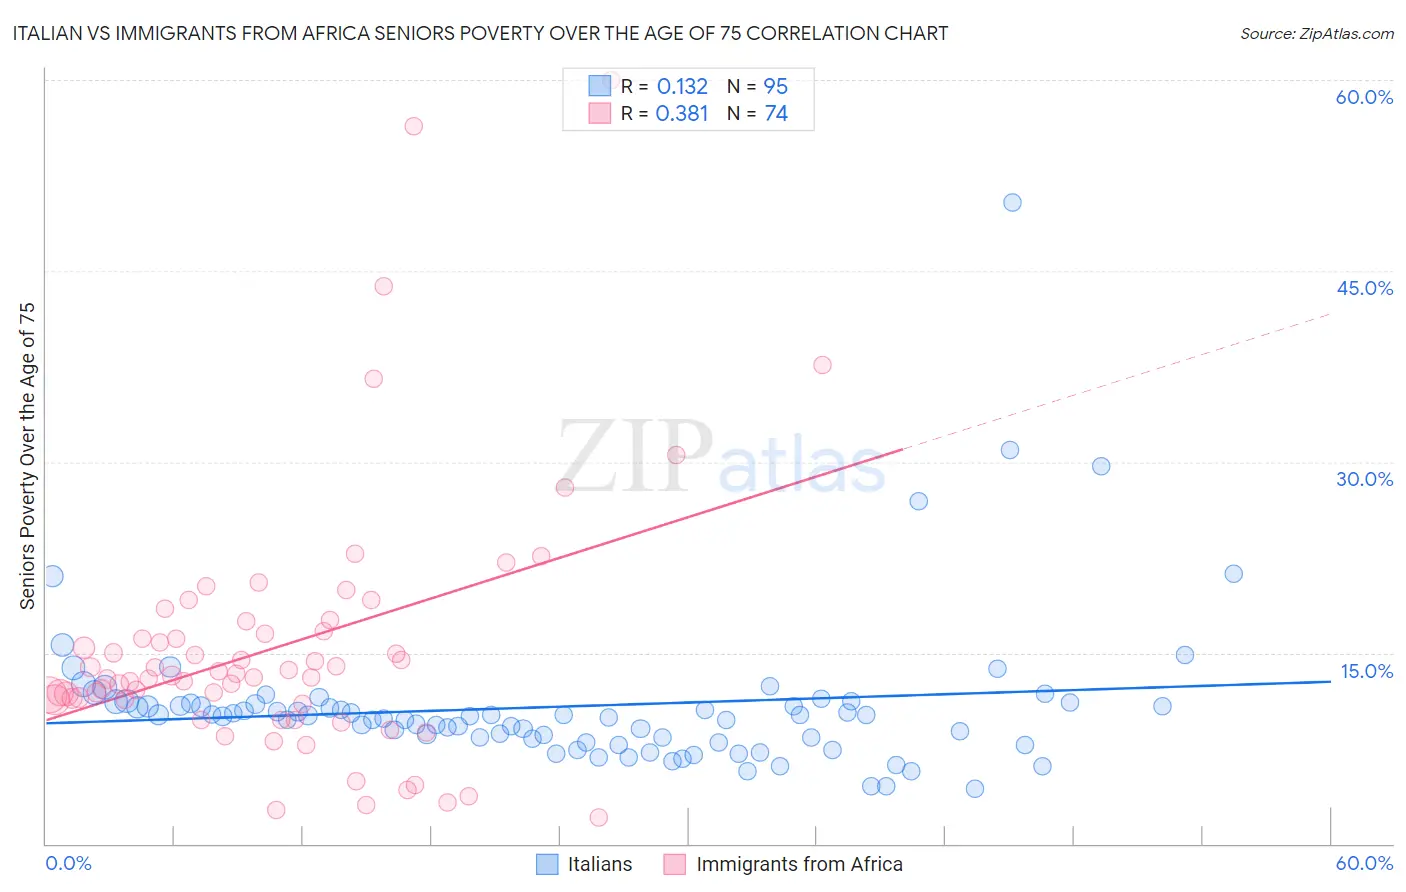 Italian vs Immigrants from Africa Seniors Poverty Over the Age of 75